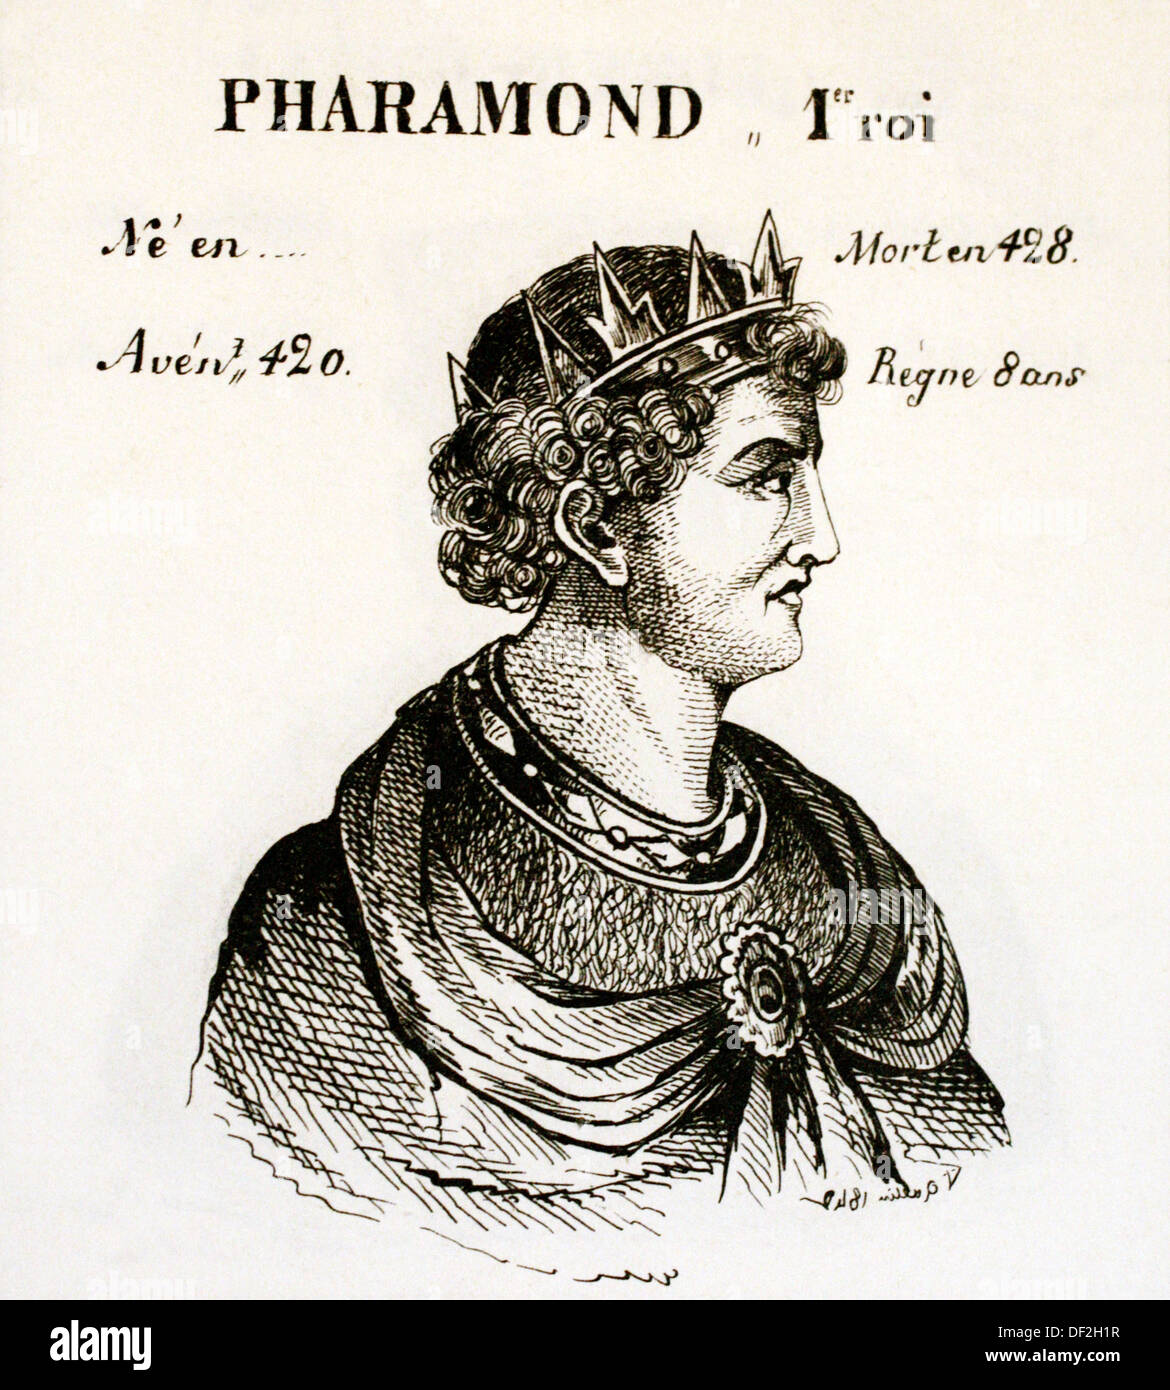 Pharamond, 1st king of France from 420 to 428. History of France, by  J.Henry (1842) Stock Photo